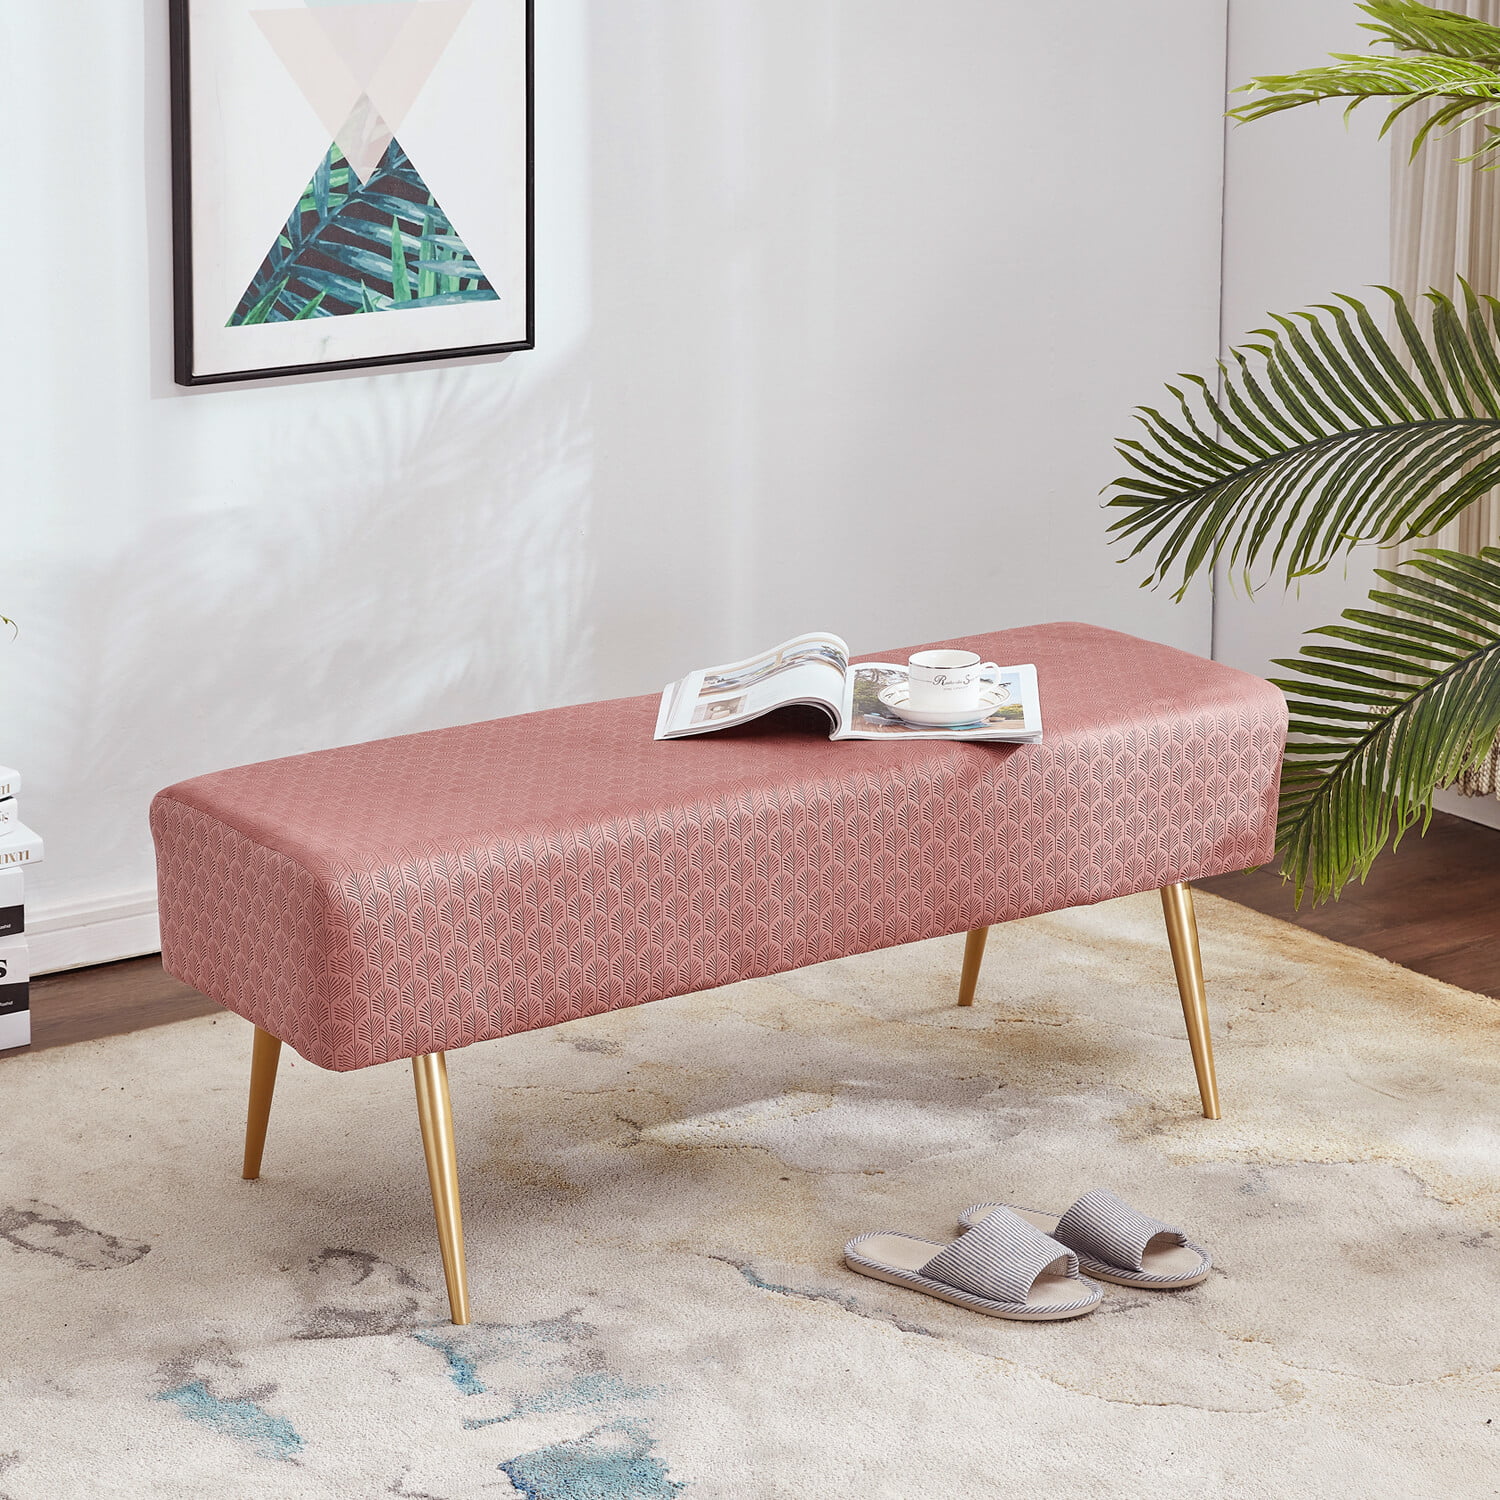 Dressing Chair for Living Room Entryway Bedroom Mxfurhawa 45.7 Inches Velvet Ottoman Bench Footstool Bed End Stool with Golden Metal Legs and Non-Slip Foot Pads Pink